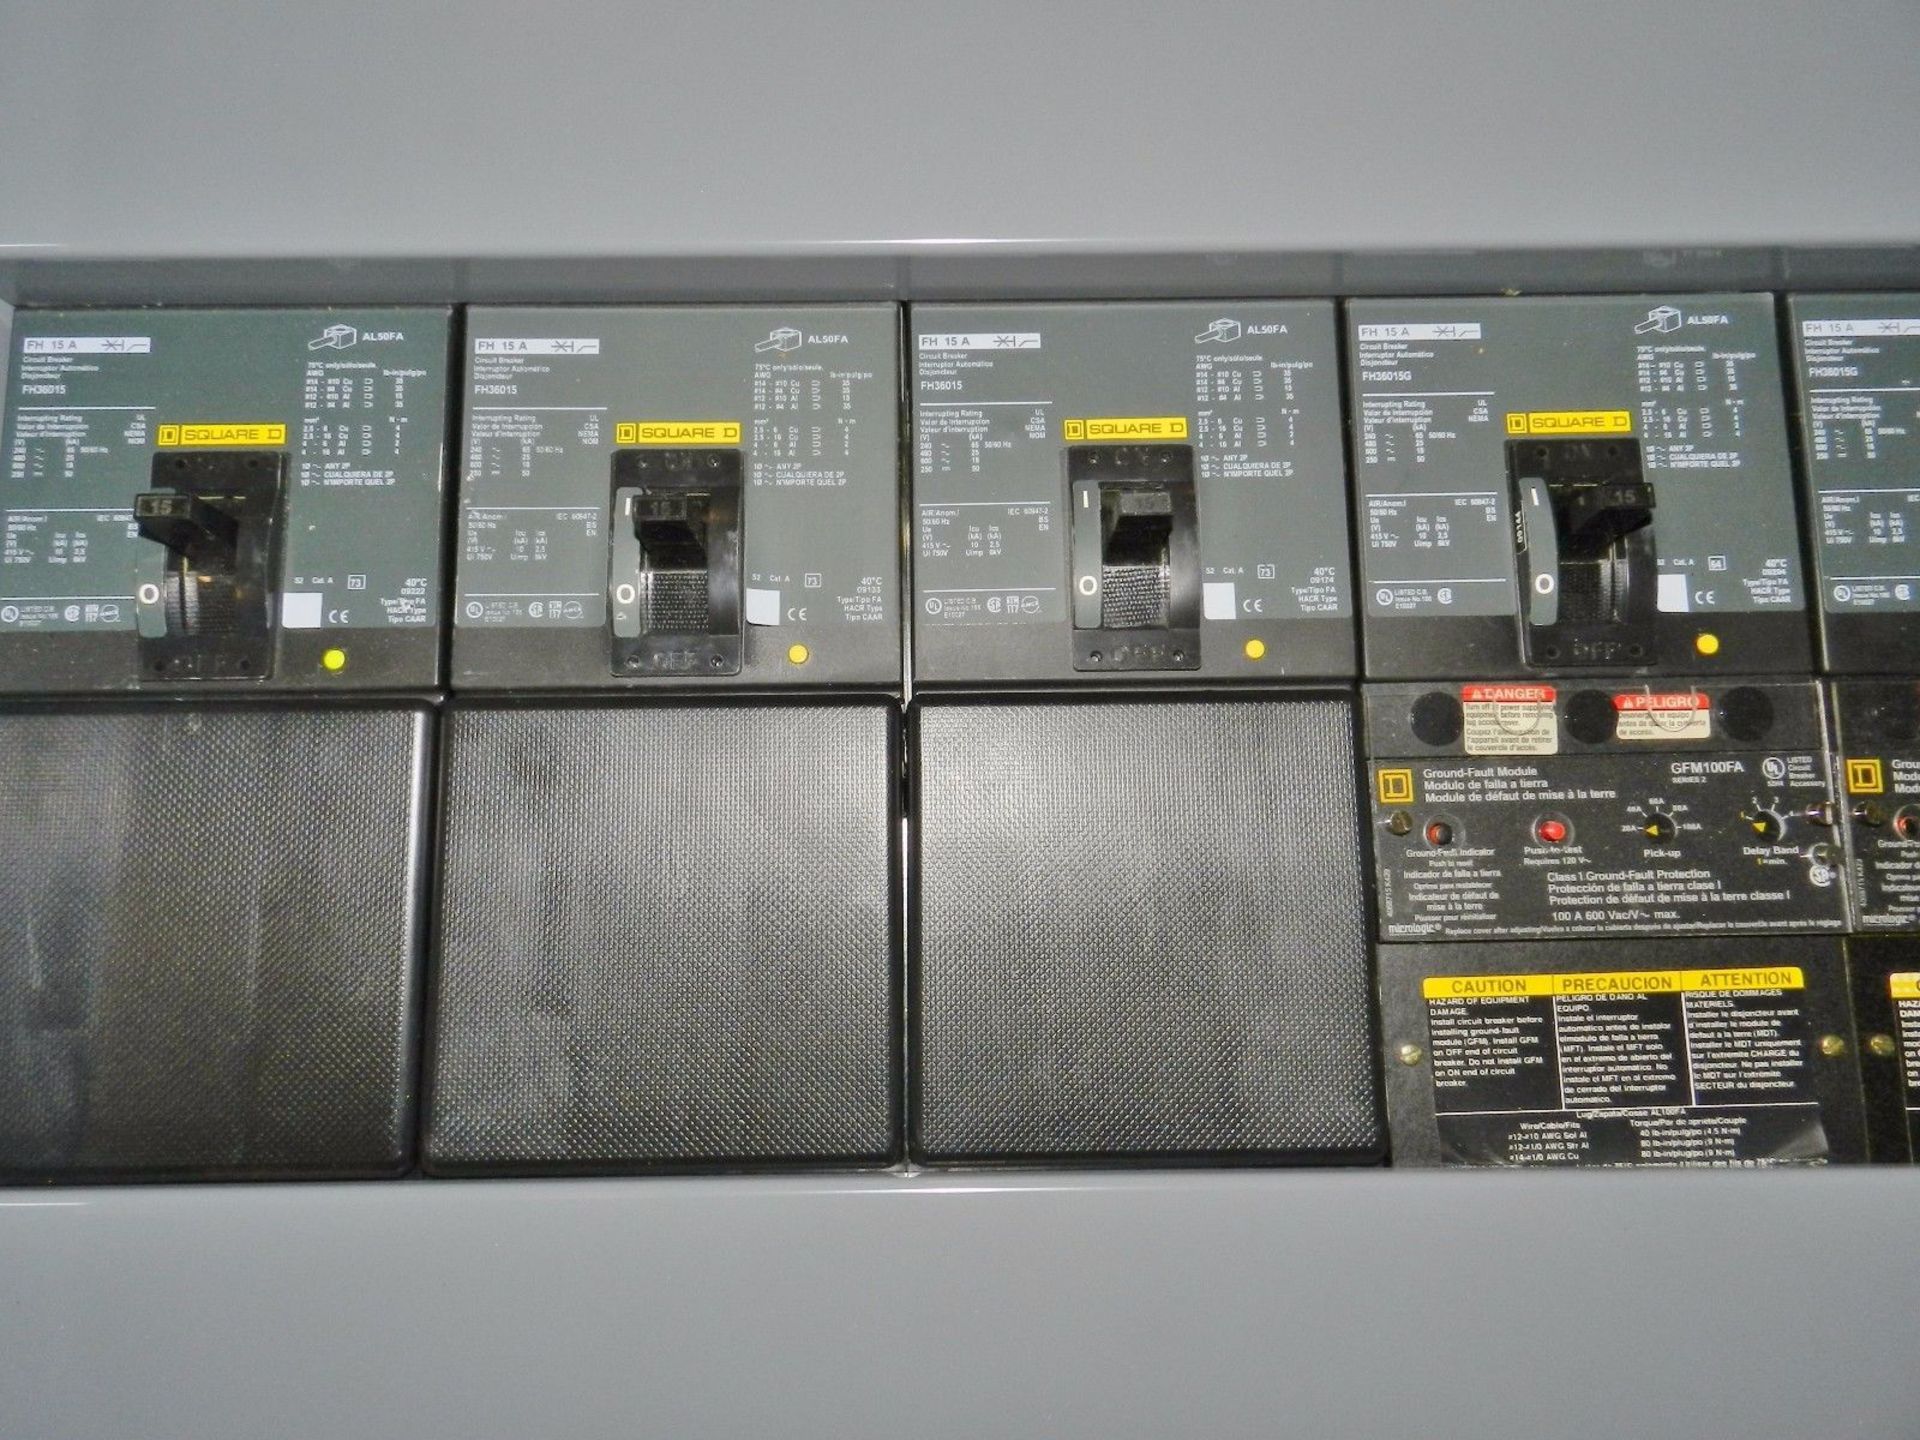 Square D HCP I-Line Panelboard w/ 400 Amp Breakers - Image 3 of 5